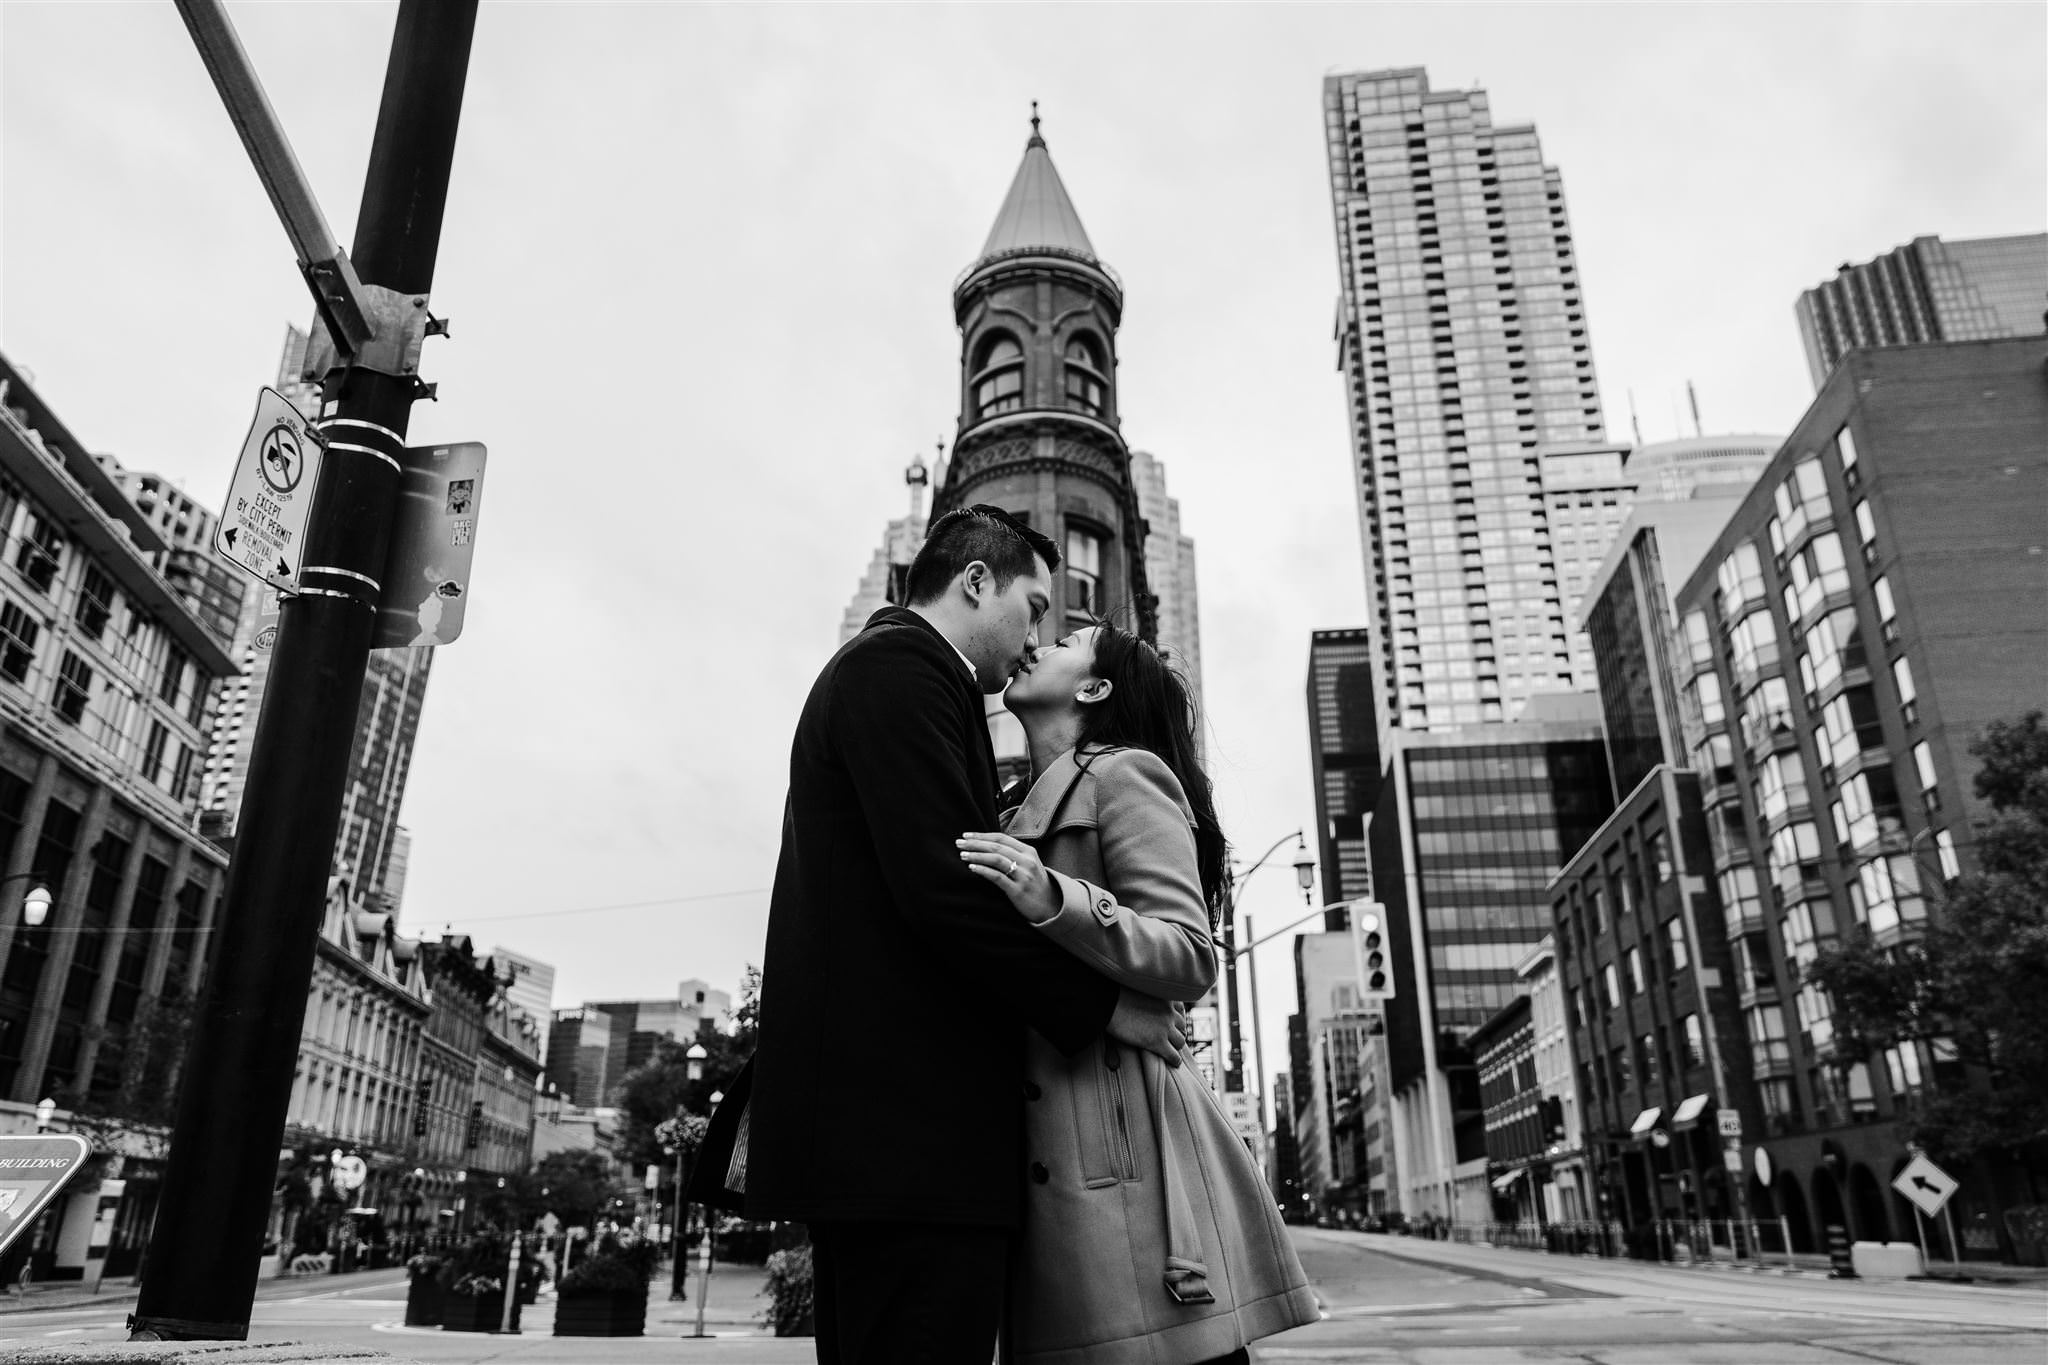 photography locations in toronto, st lawrence market wedding photos, st lawrence market engagement photos